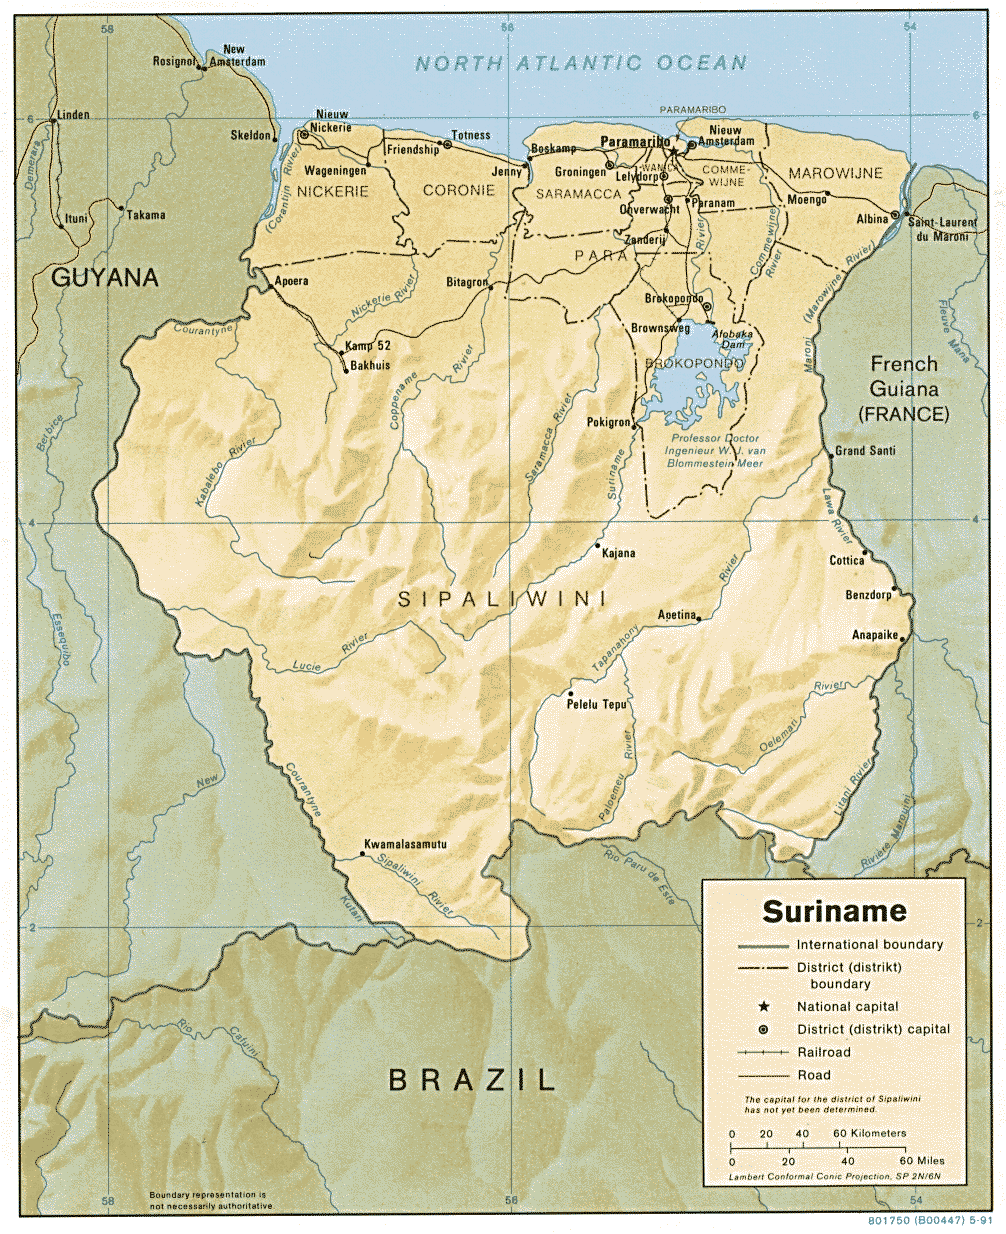 Suriname Shaded Relief Map